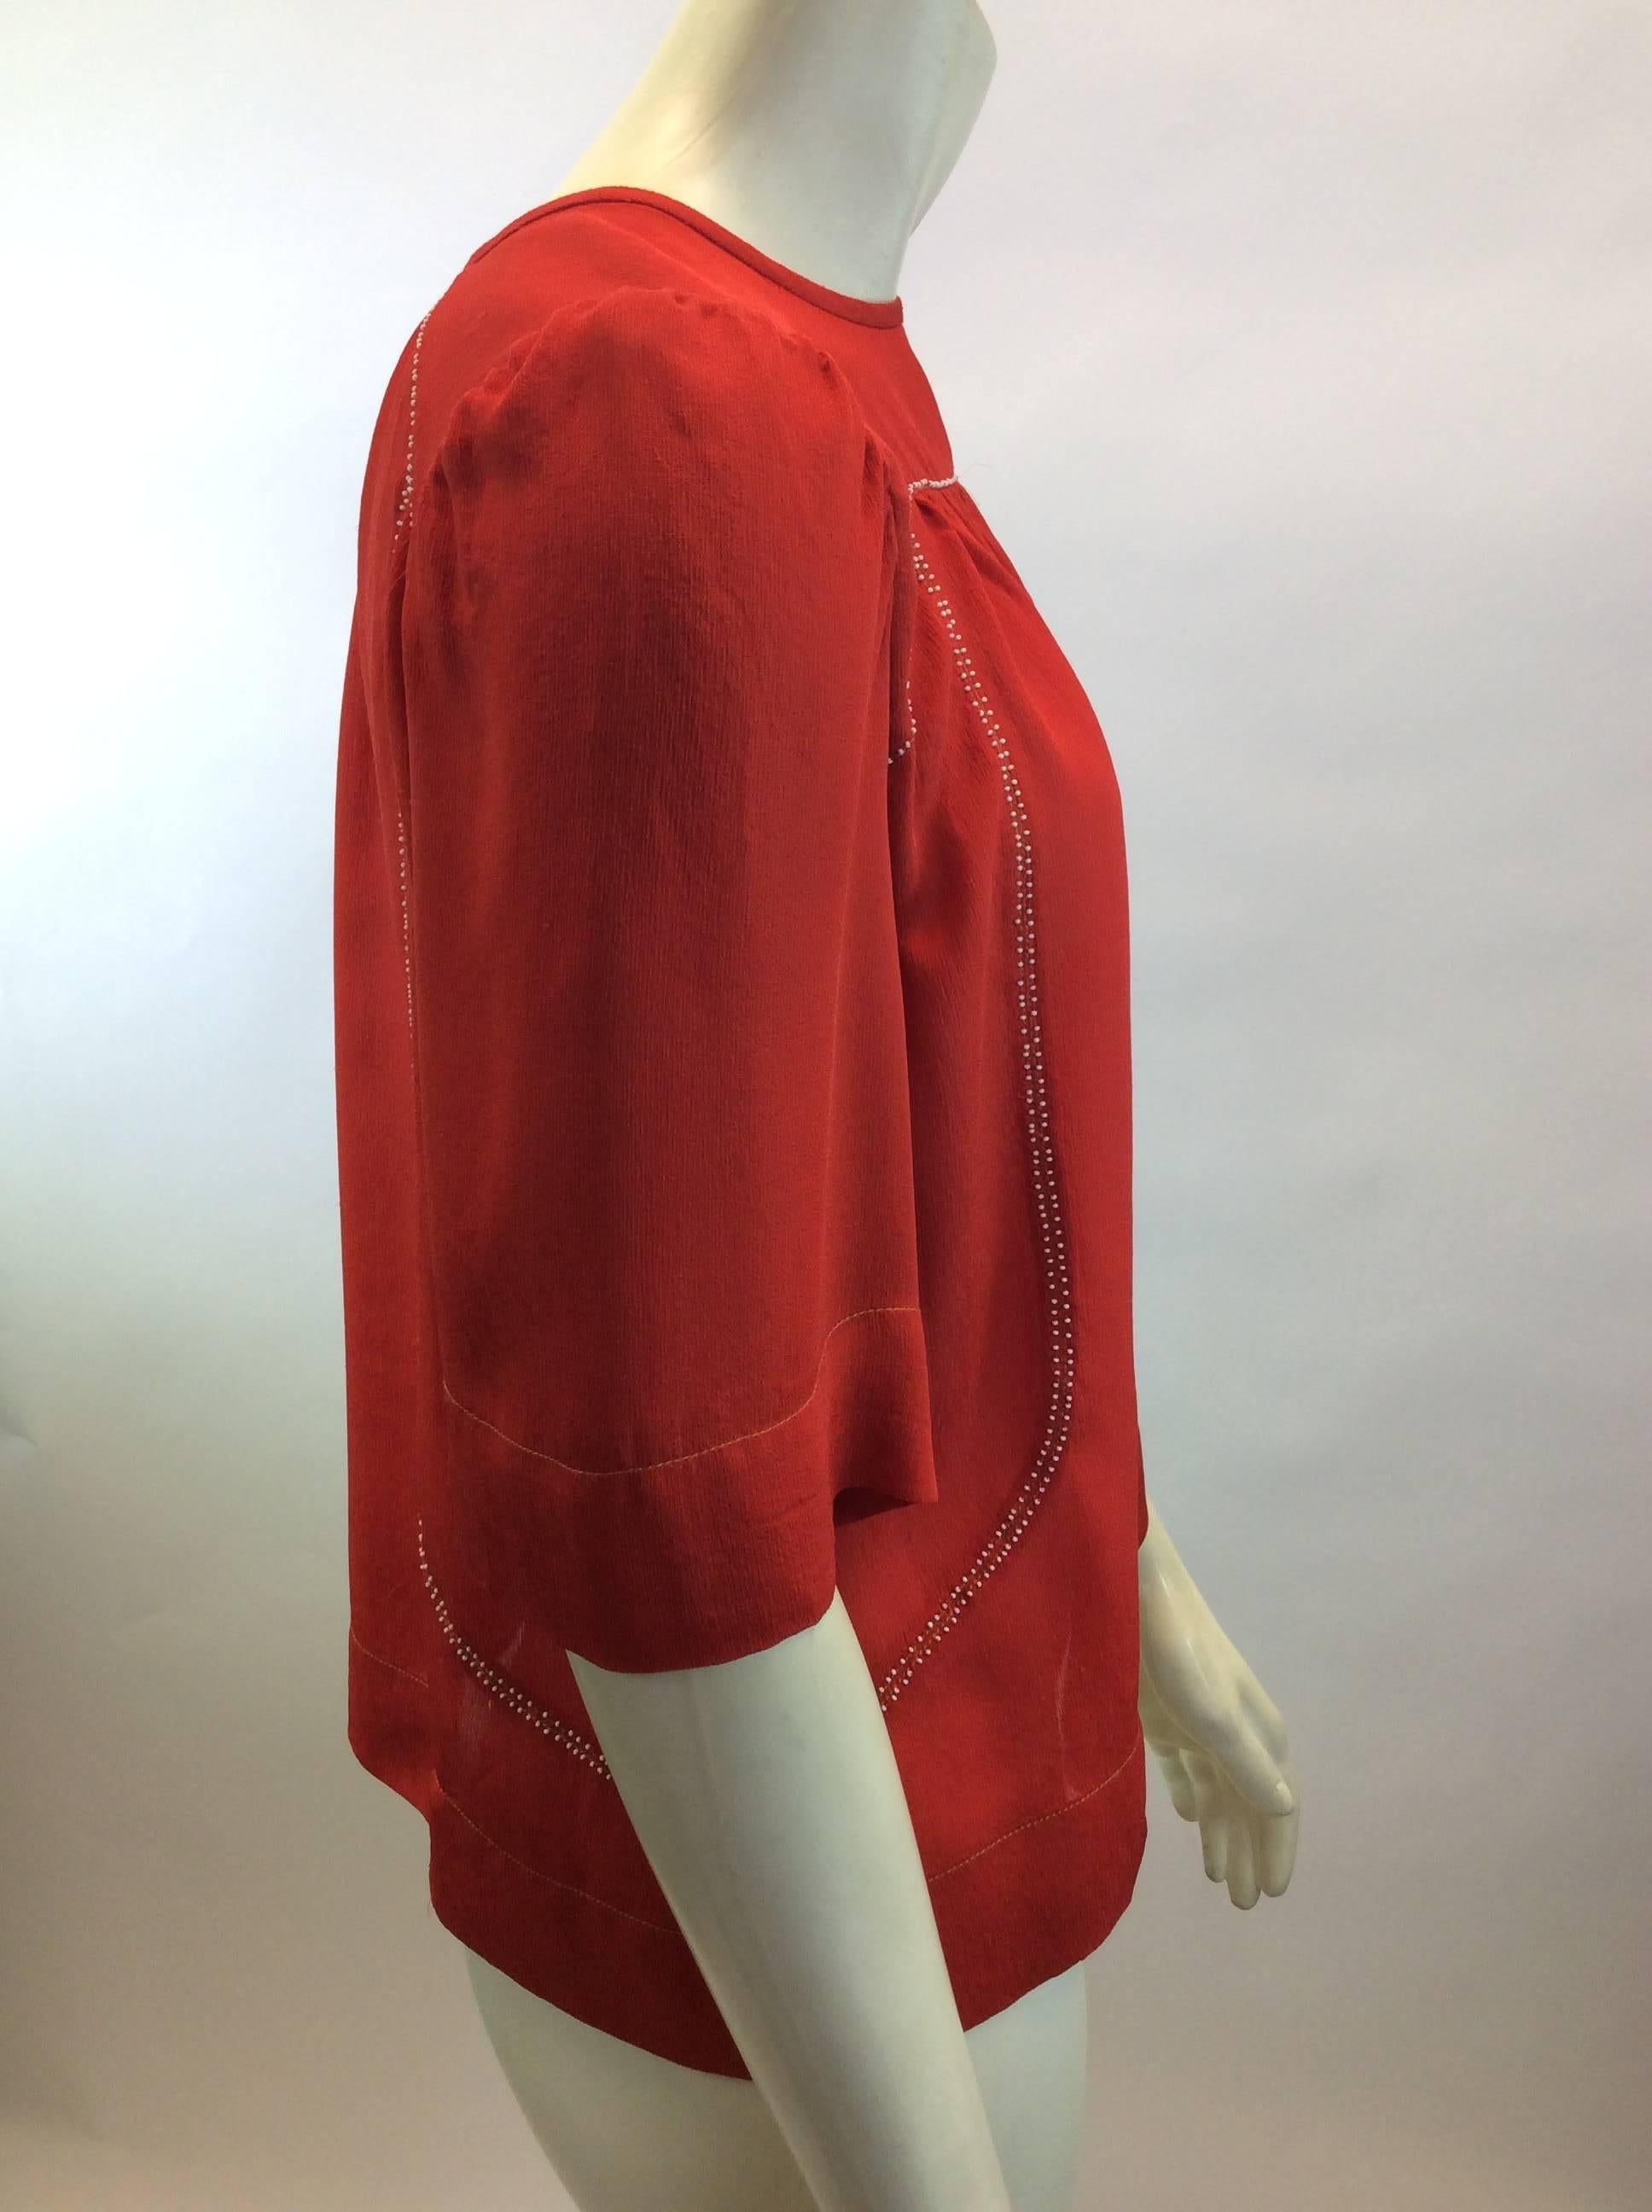 Isabel Marant Red Silk Blouse In Excellent Condition For Sale In Narberth, PA